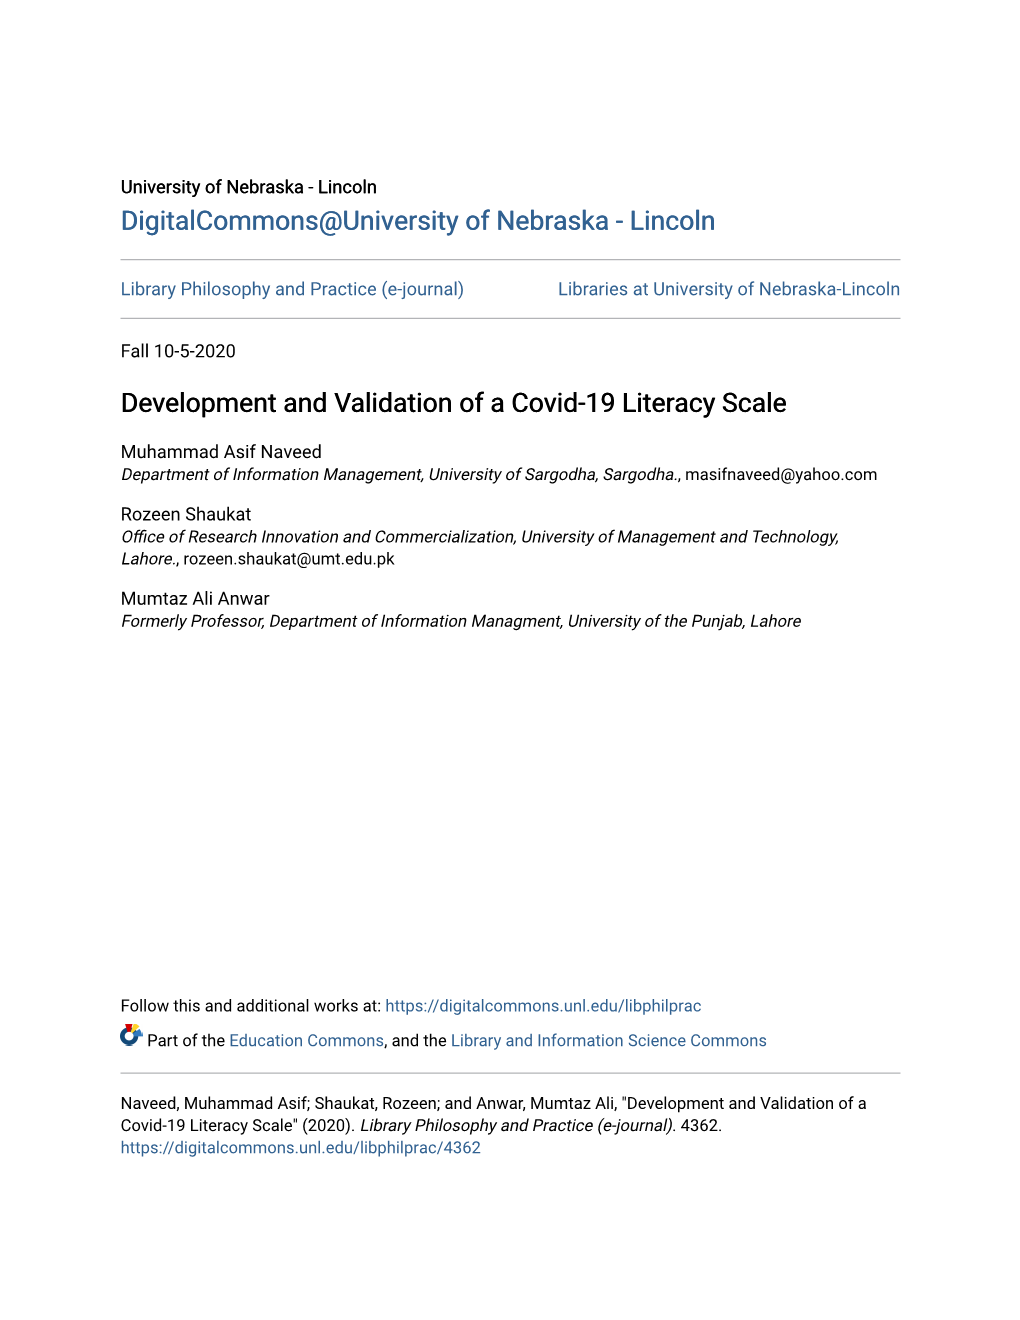 Development and Validation of a Covid-19 Literacy Scale